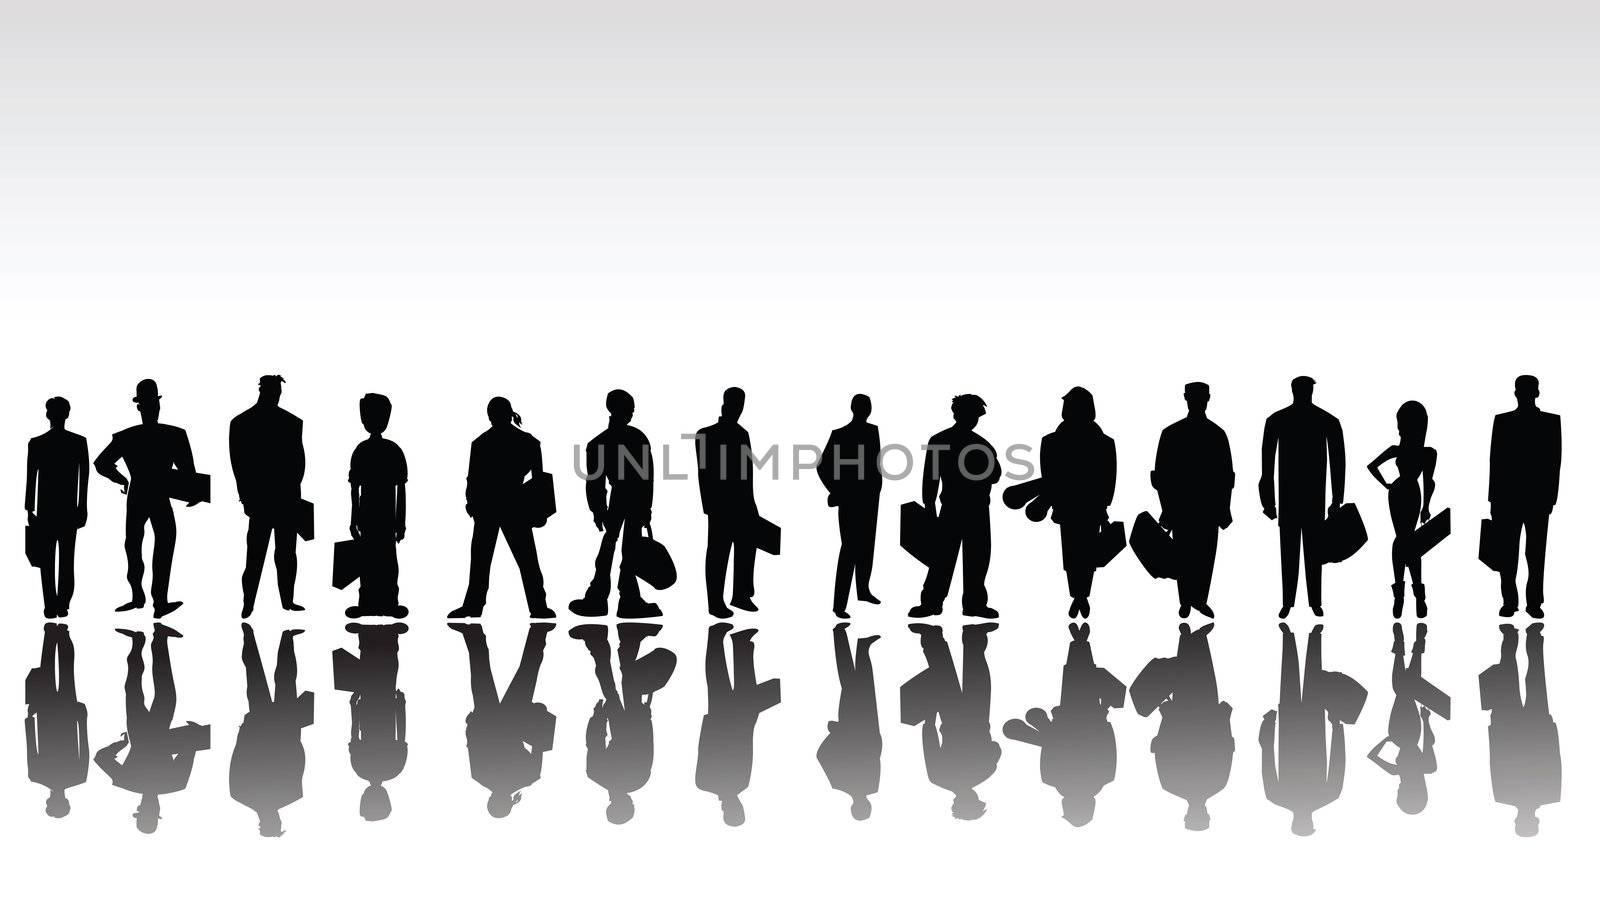 Stylized business people silhouettes by Lirch